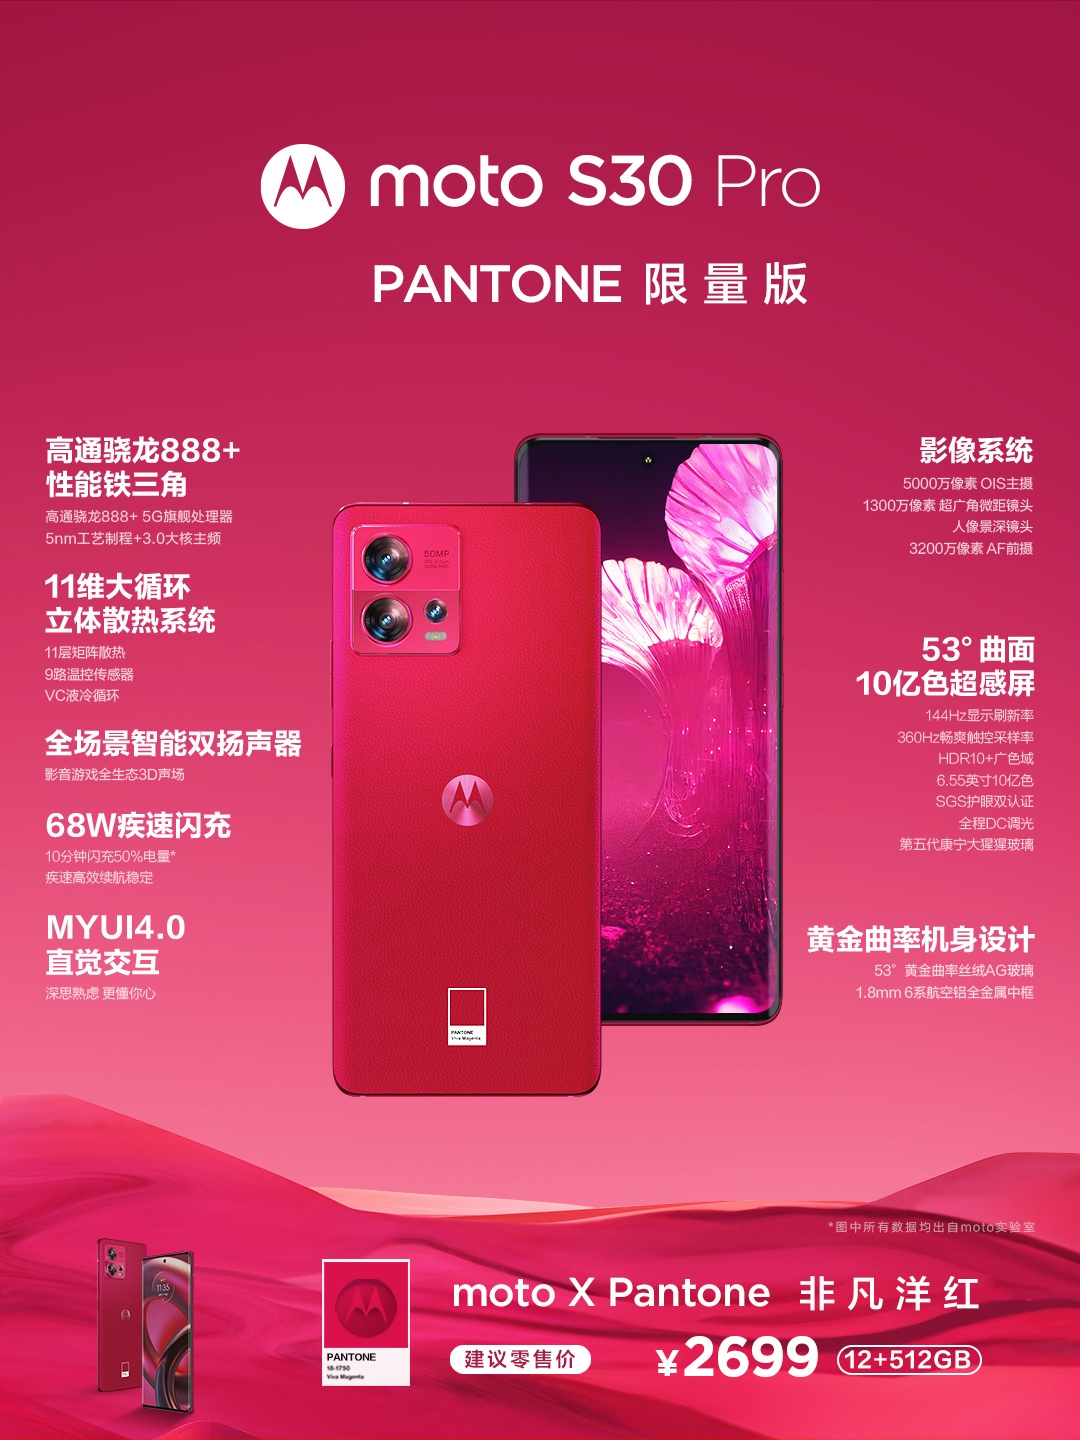 moto S30 Pro Pantone Limited Edition feature